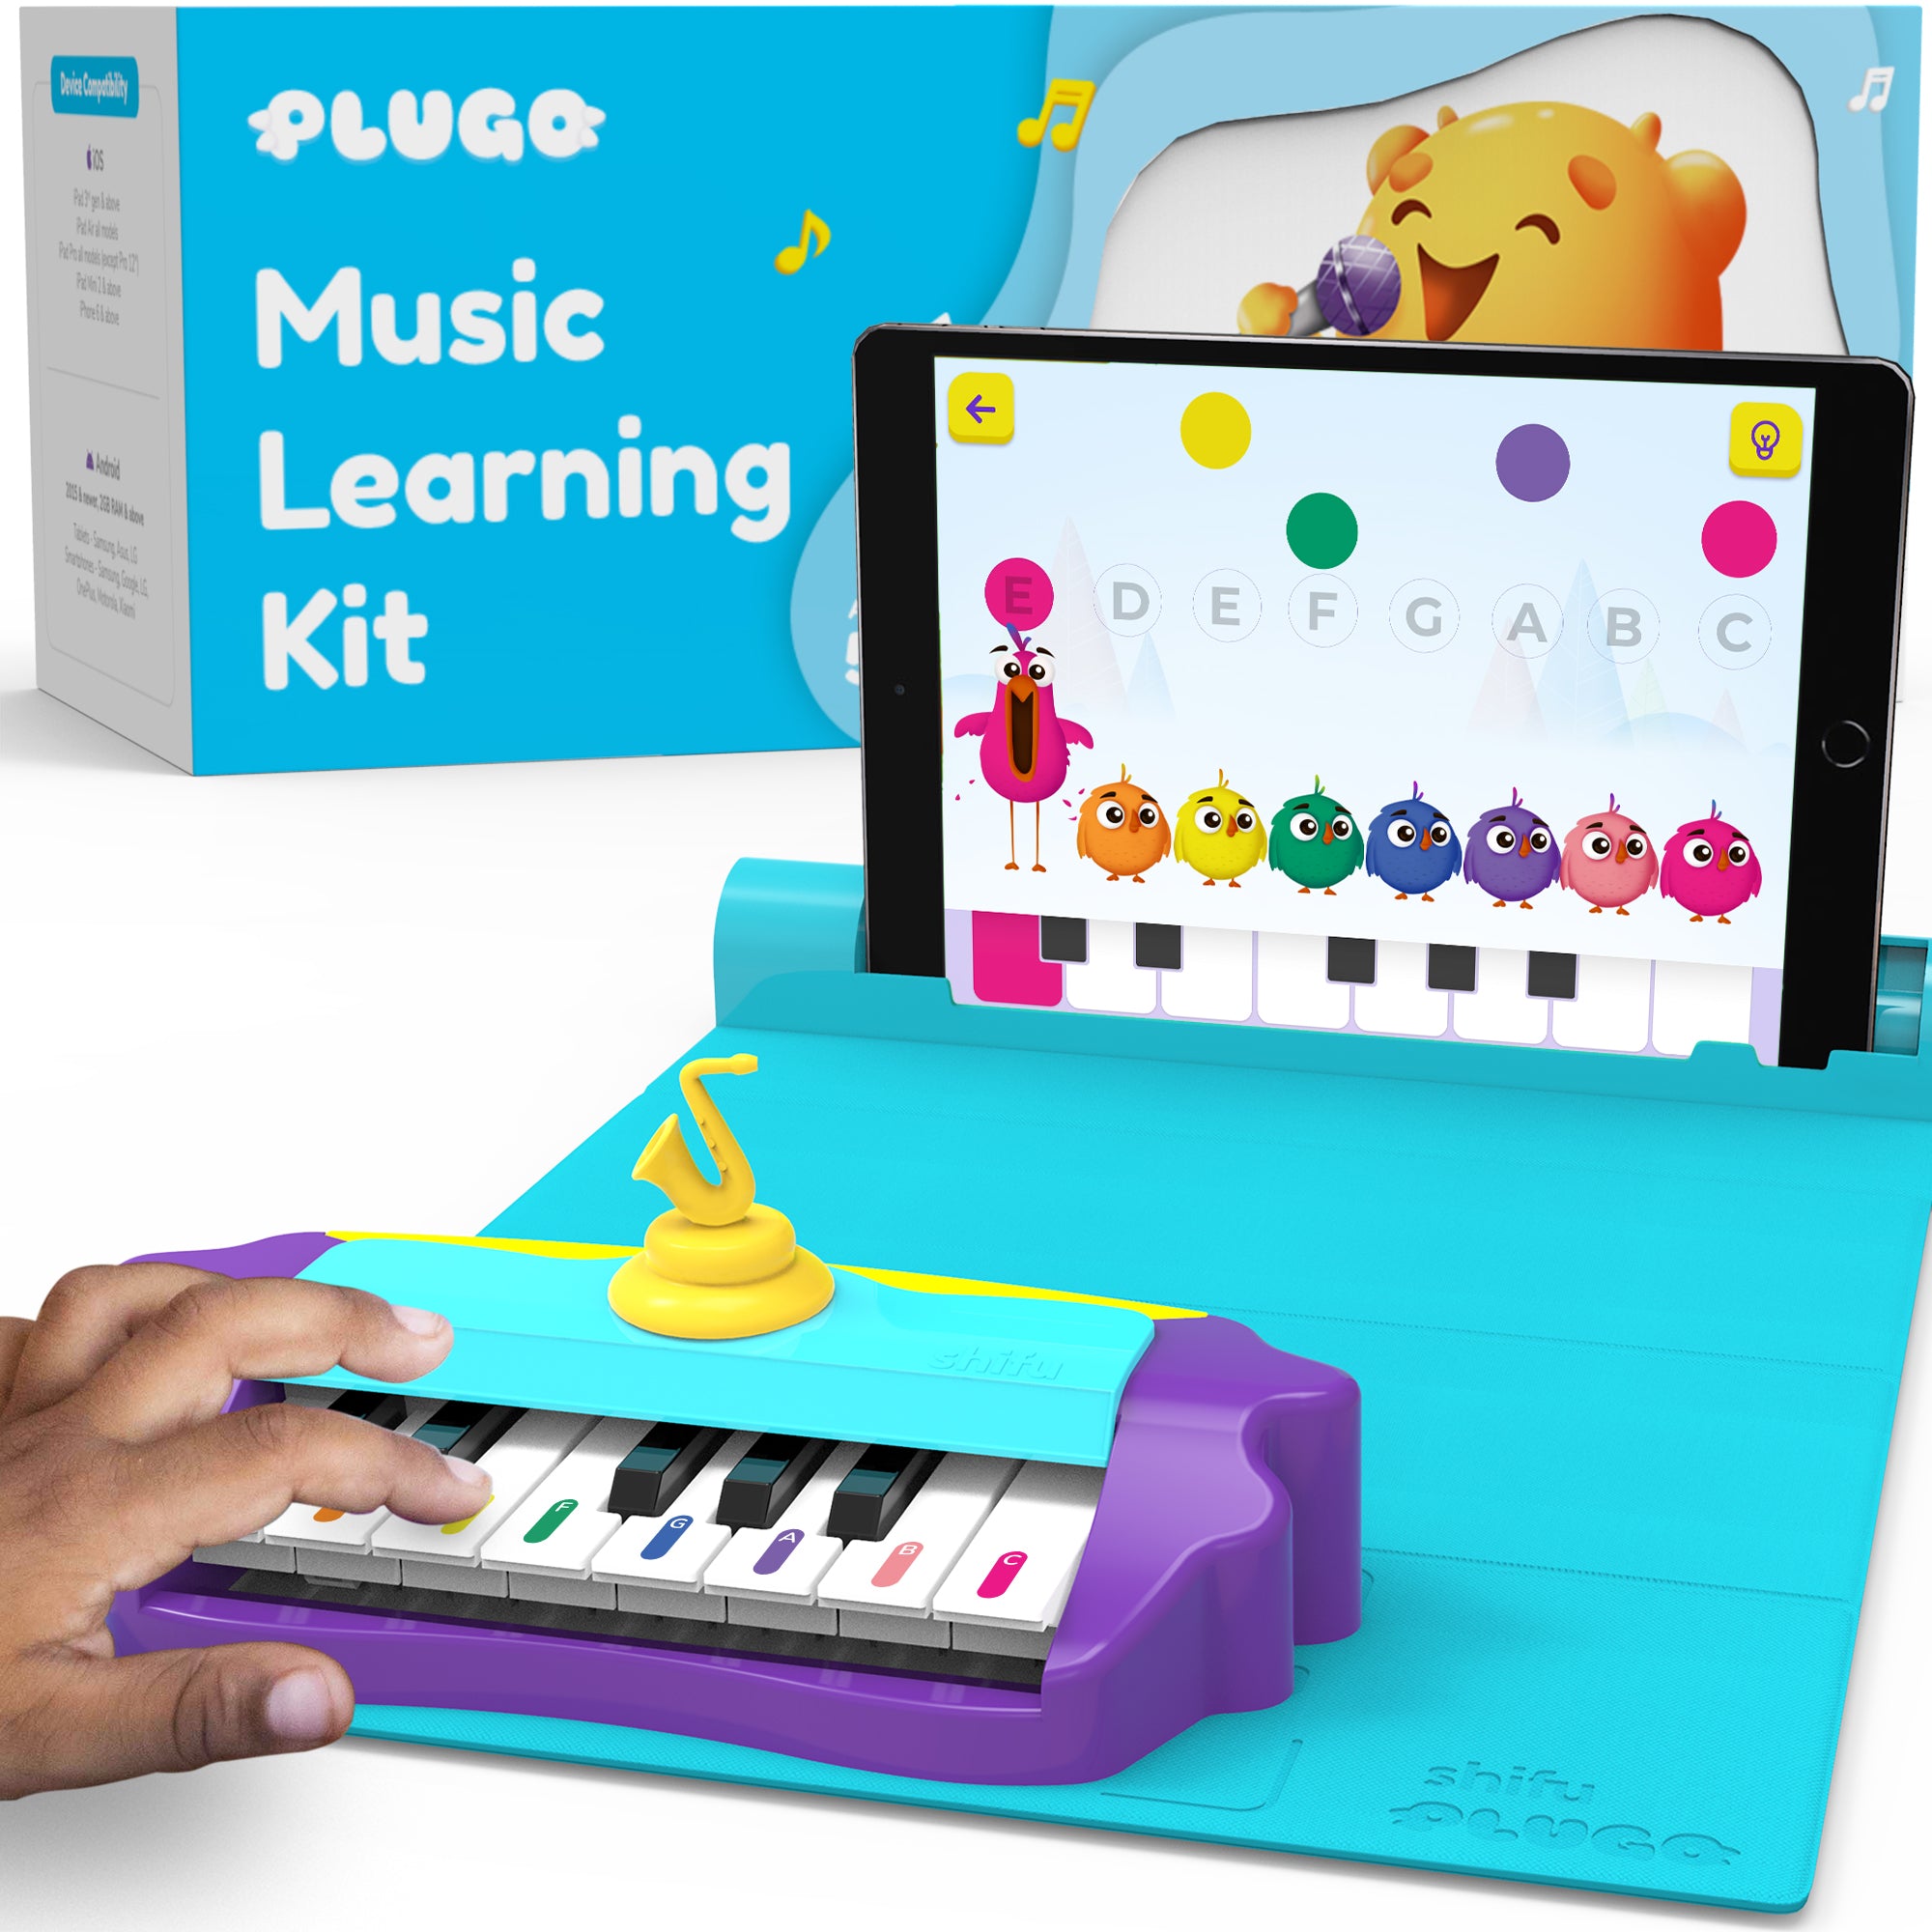 PlayShifu Plugo Tunes (App Based) - Piano Learning Kit Musical STEAM Toy for Ages 5-10 - Educational Music Instruments Gift